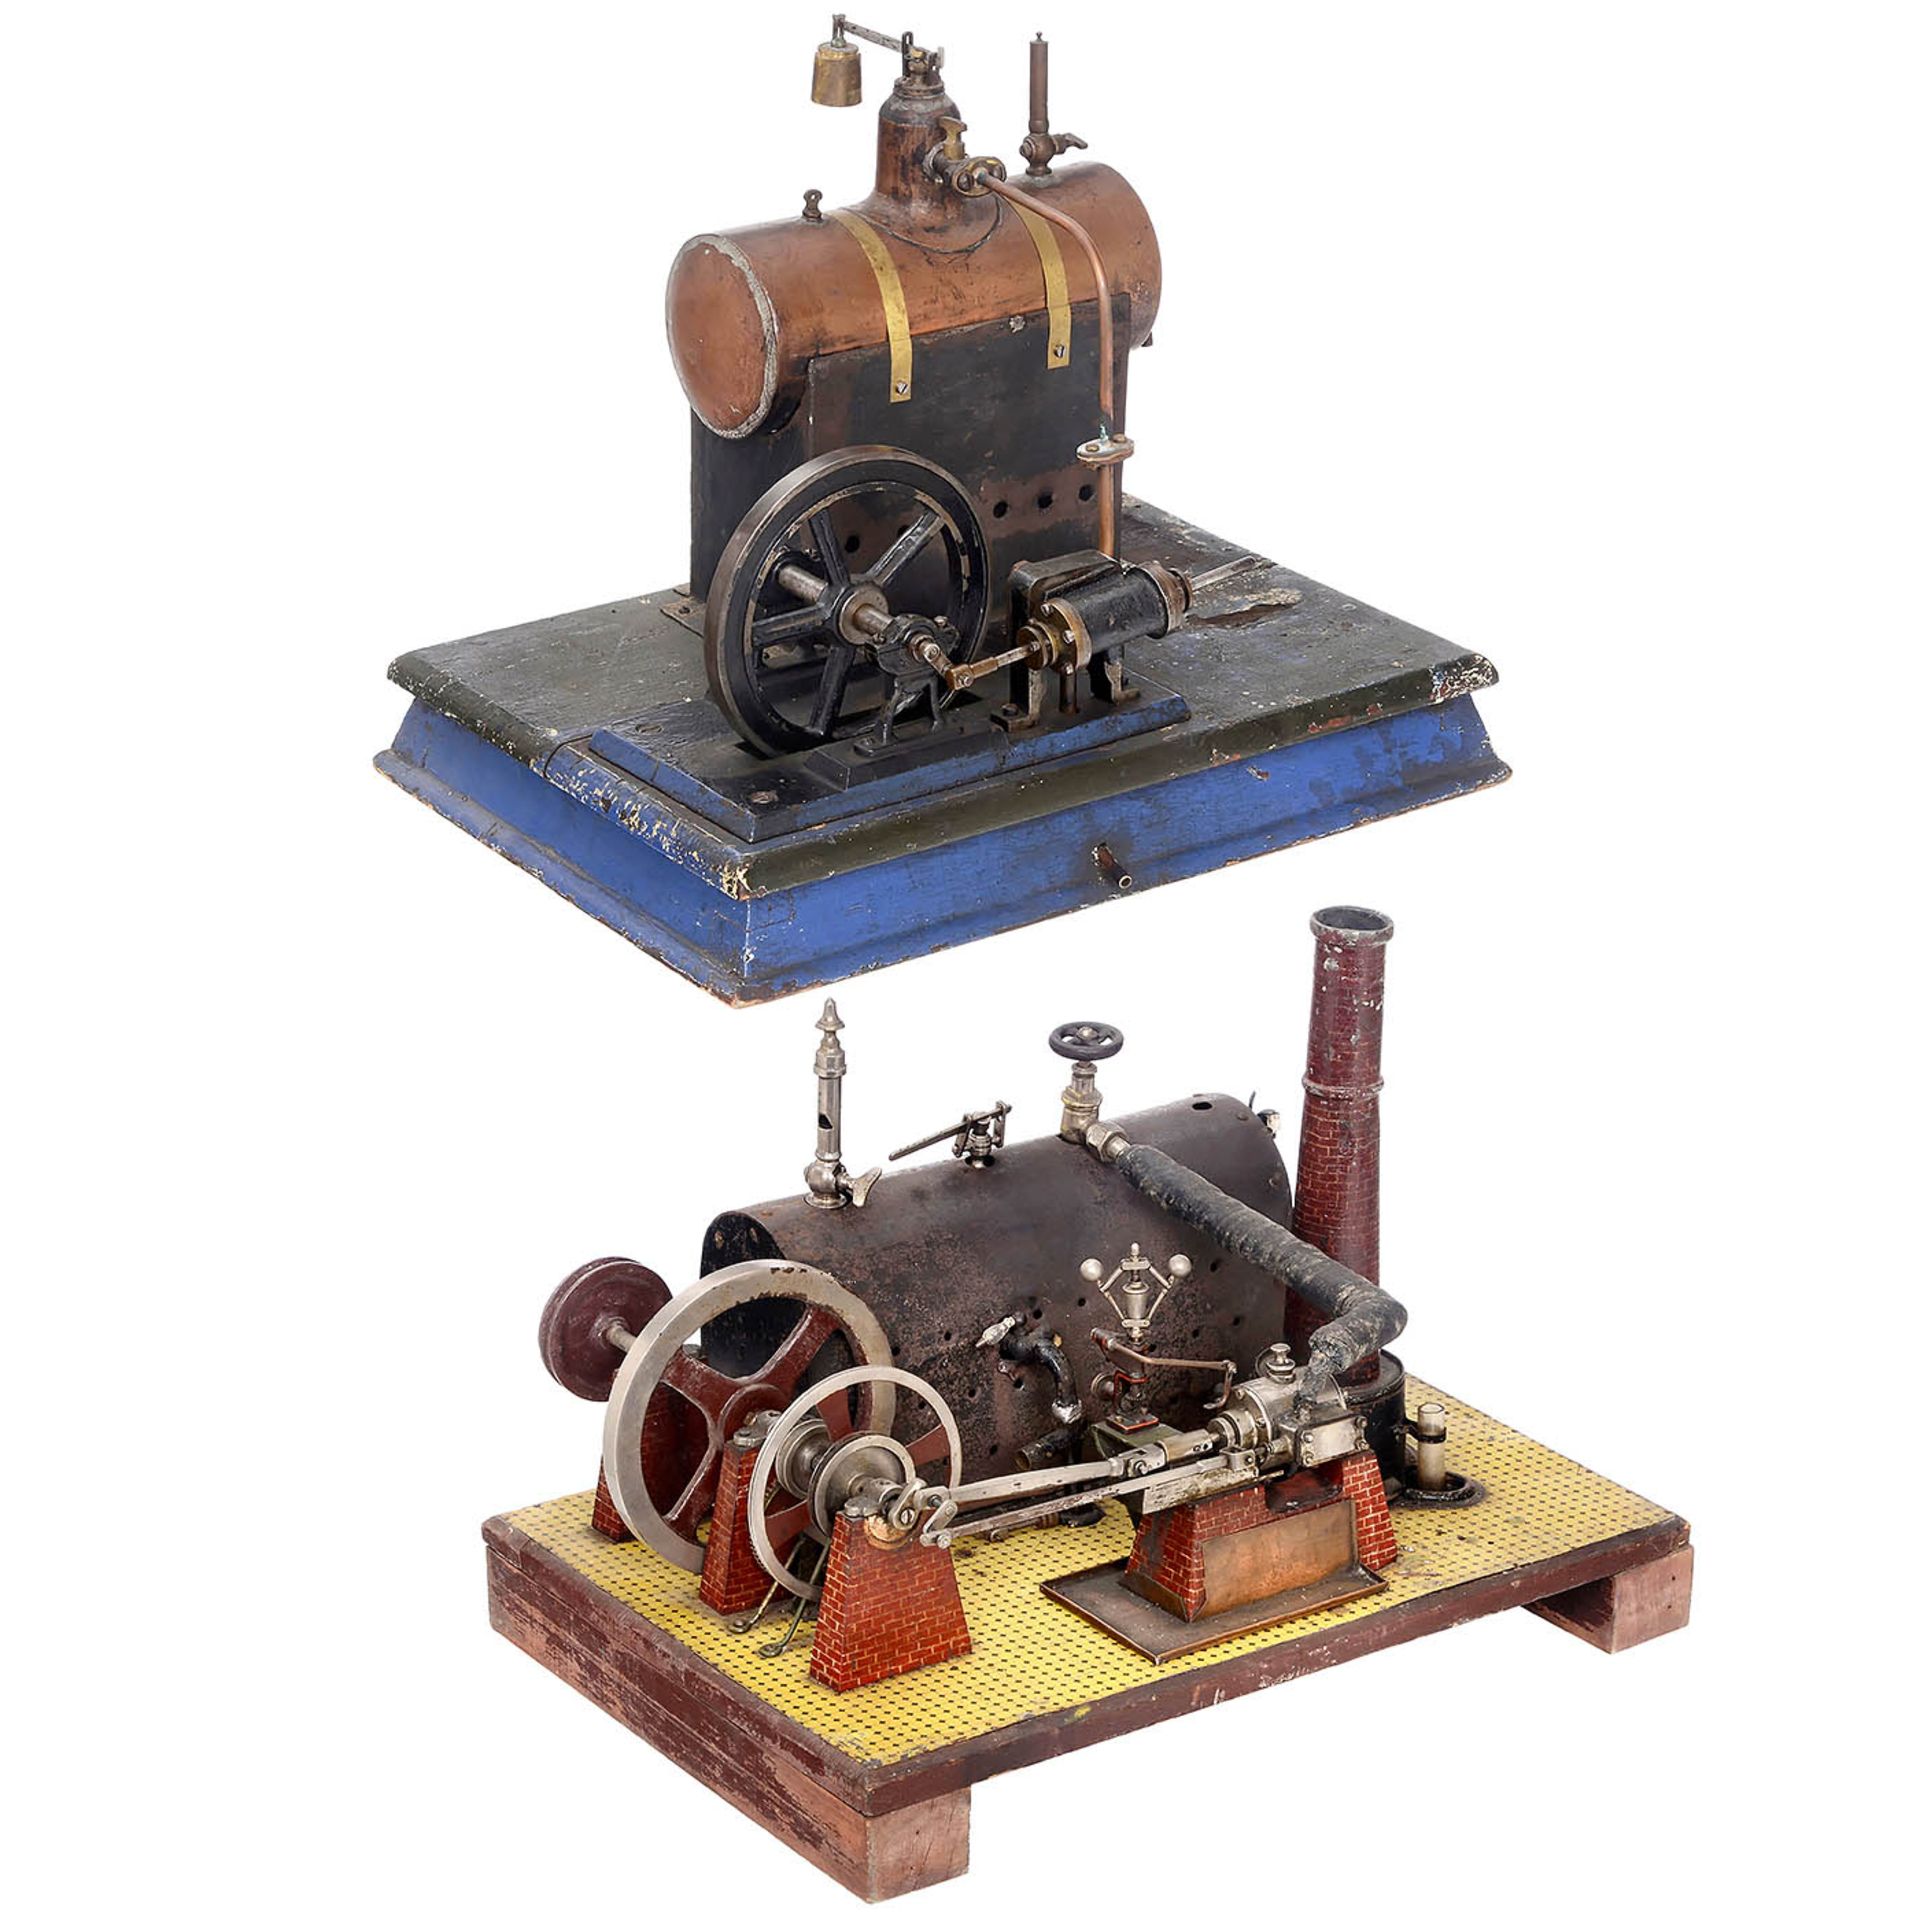 2 Live-Steam Single-Cylinder Vertical Steam Engines with Boilers, c. 1900